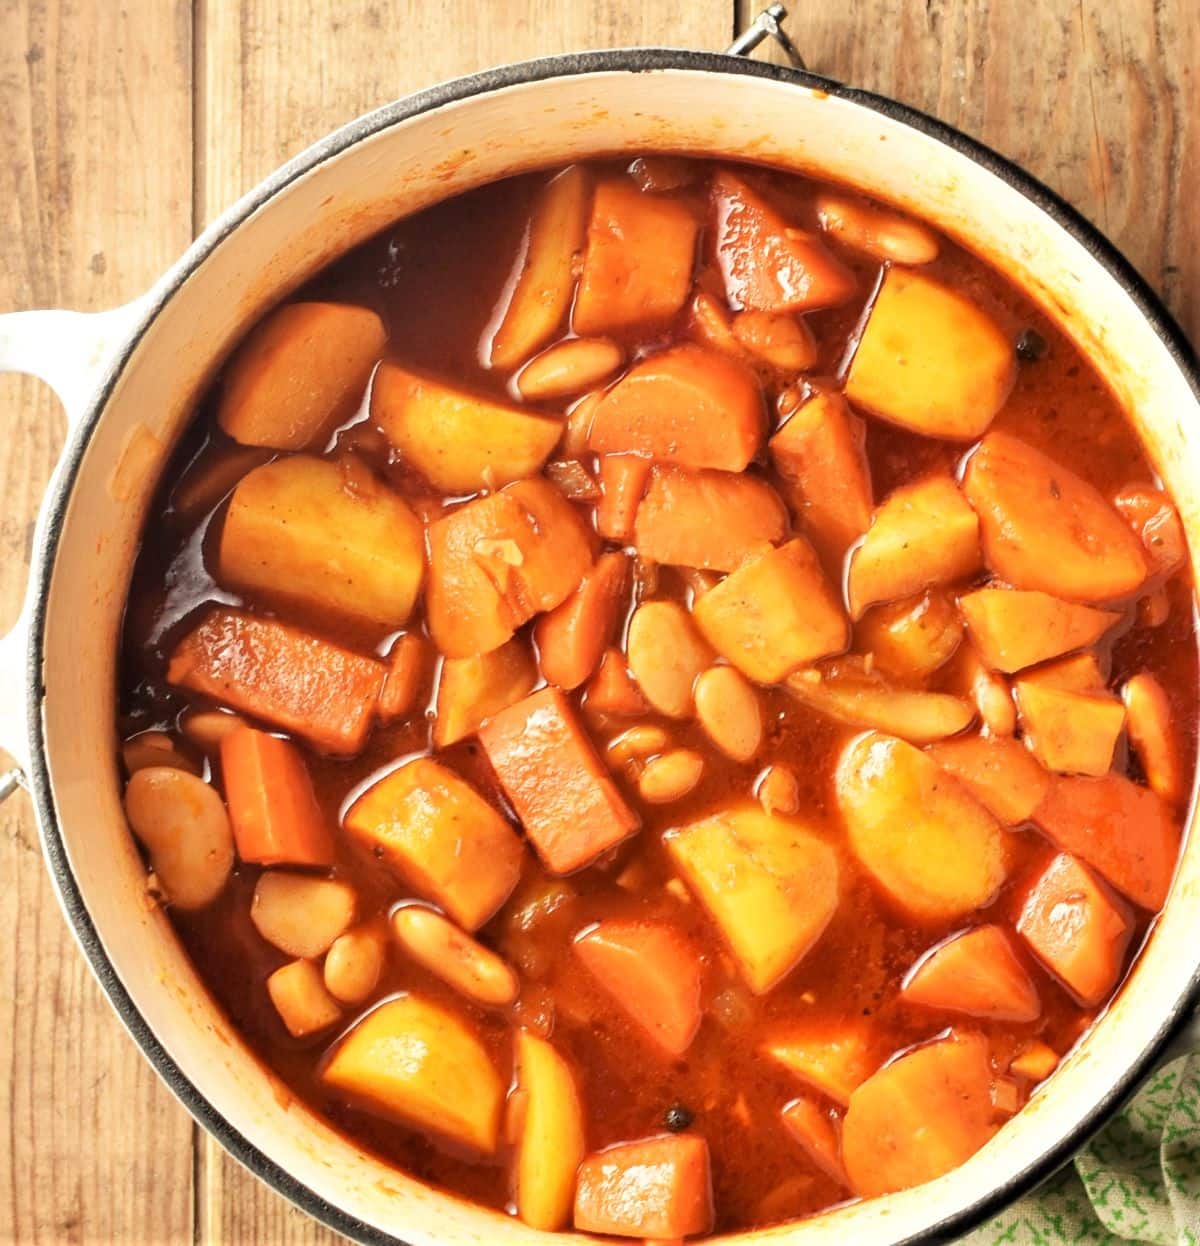 Cooking root vegetable casserole in large pot.